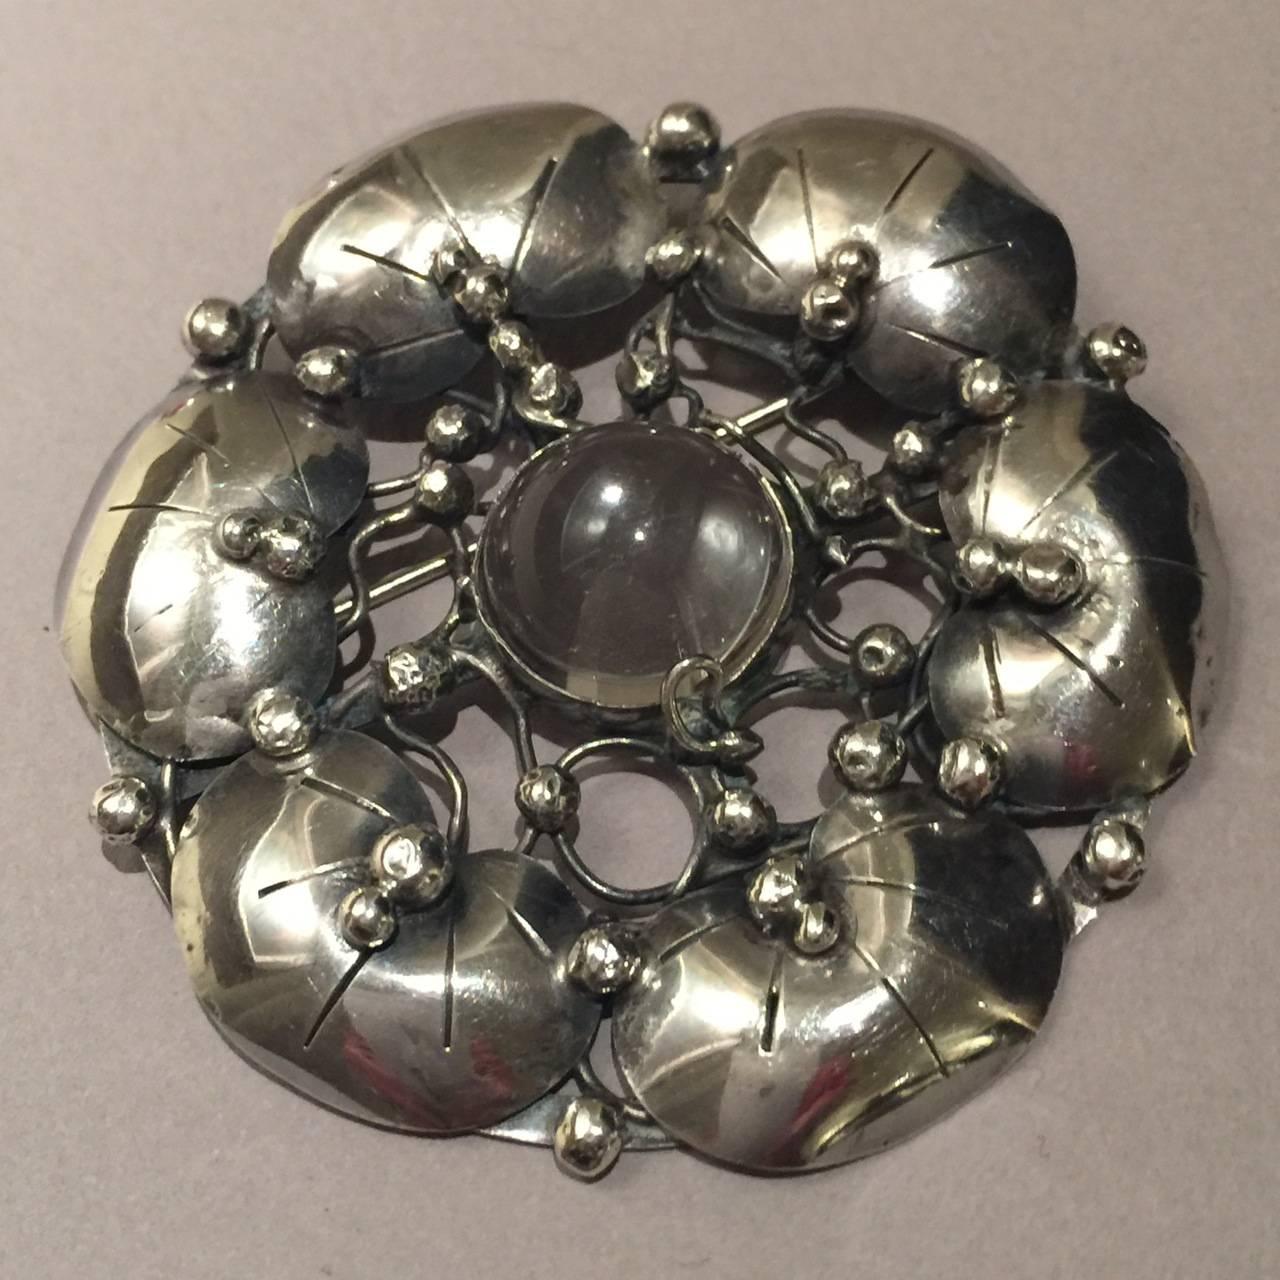 Mary Gage Sterling Silver Brooch with Rock Chrystal Cabochon.

Large brooch in seldom seen design by sought after American Silversmith , Mary Gage. Exquisite detail and rich patina. This sterling silver brooch is in excellent condition.

Dimensions: